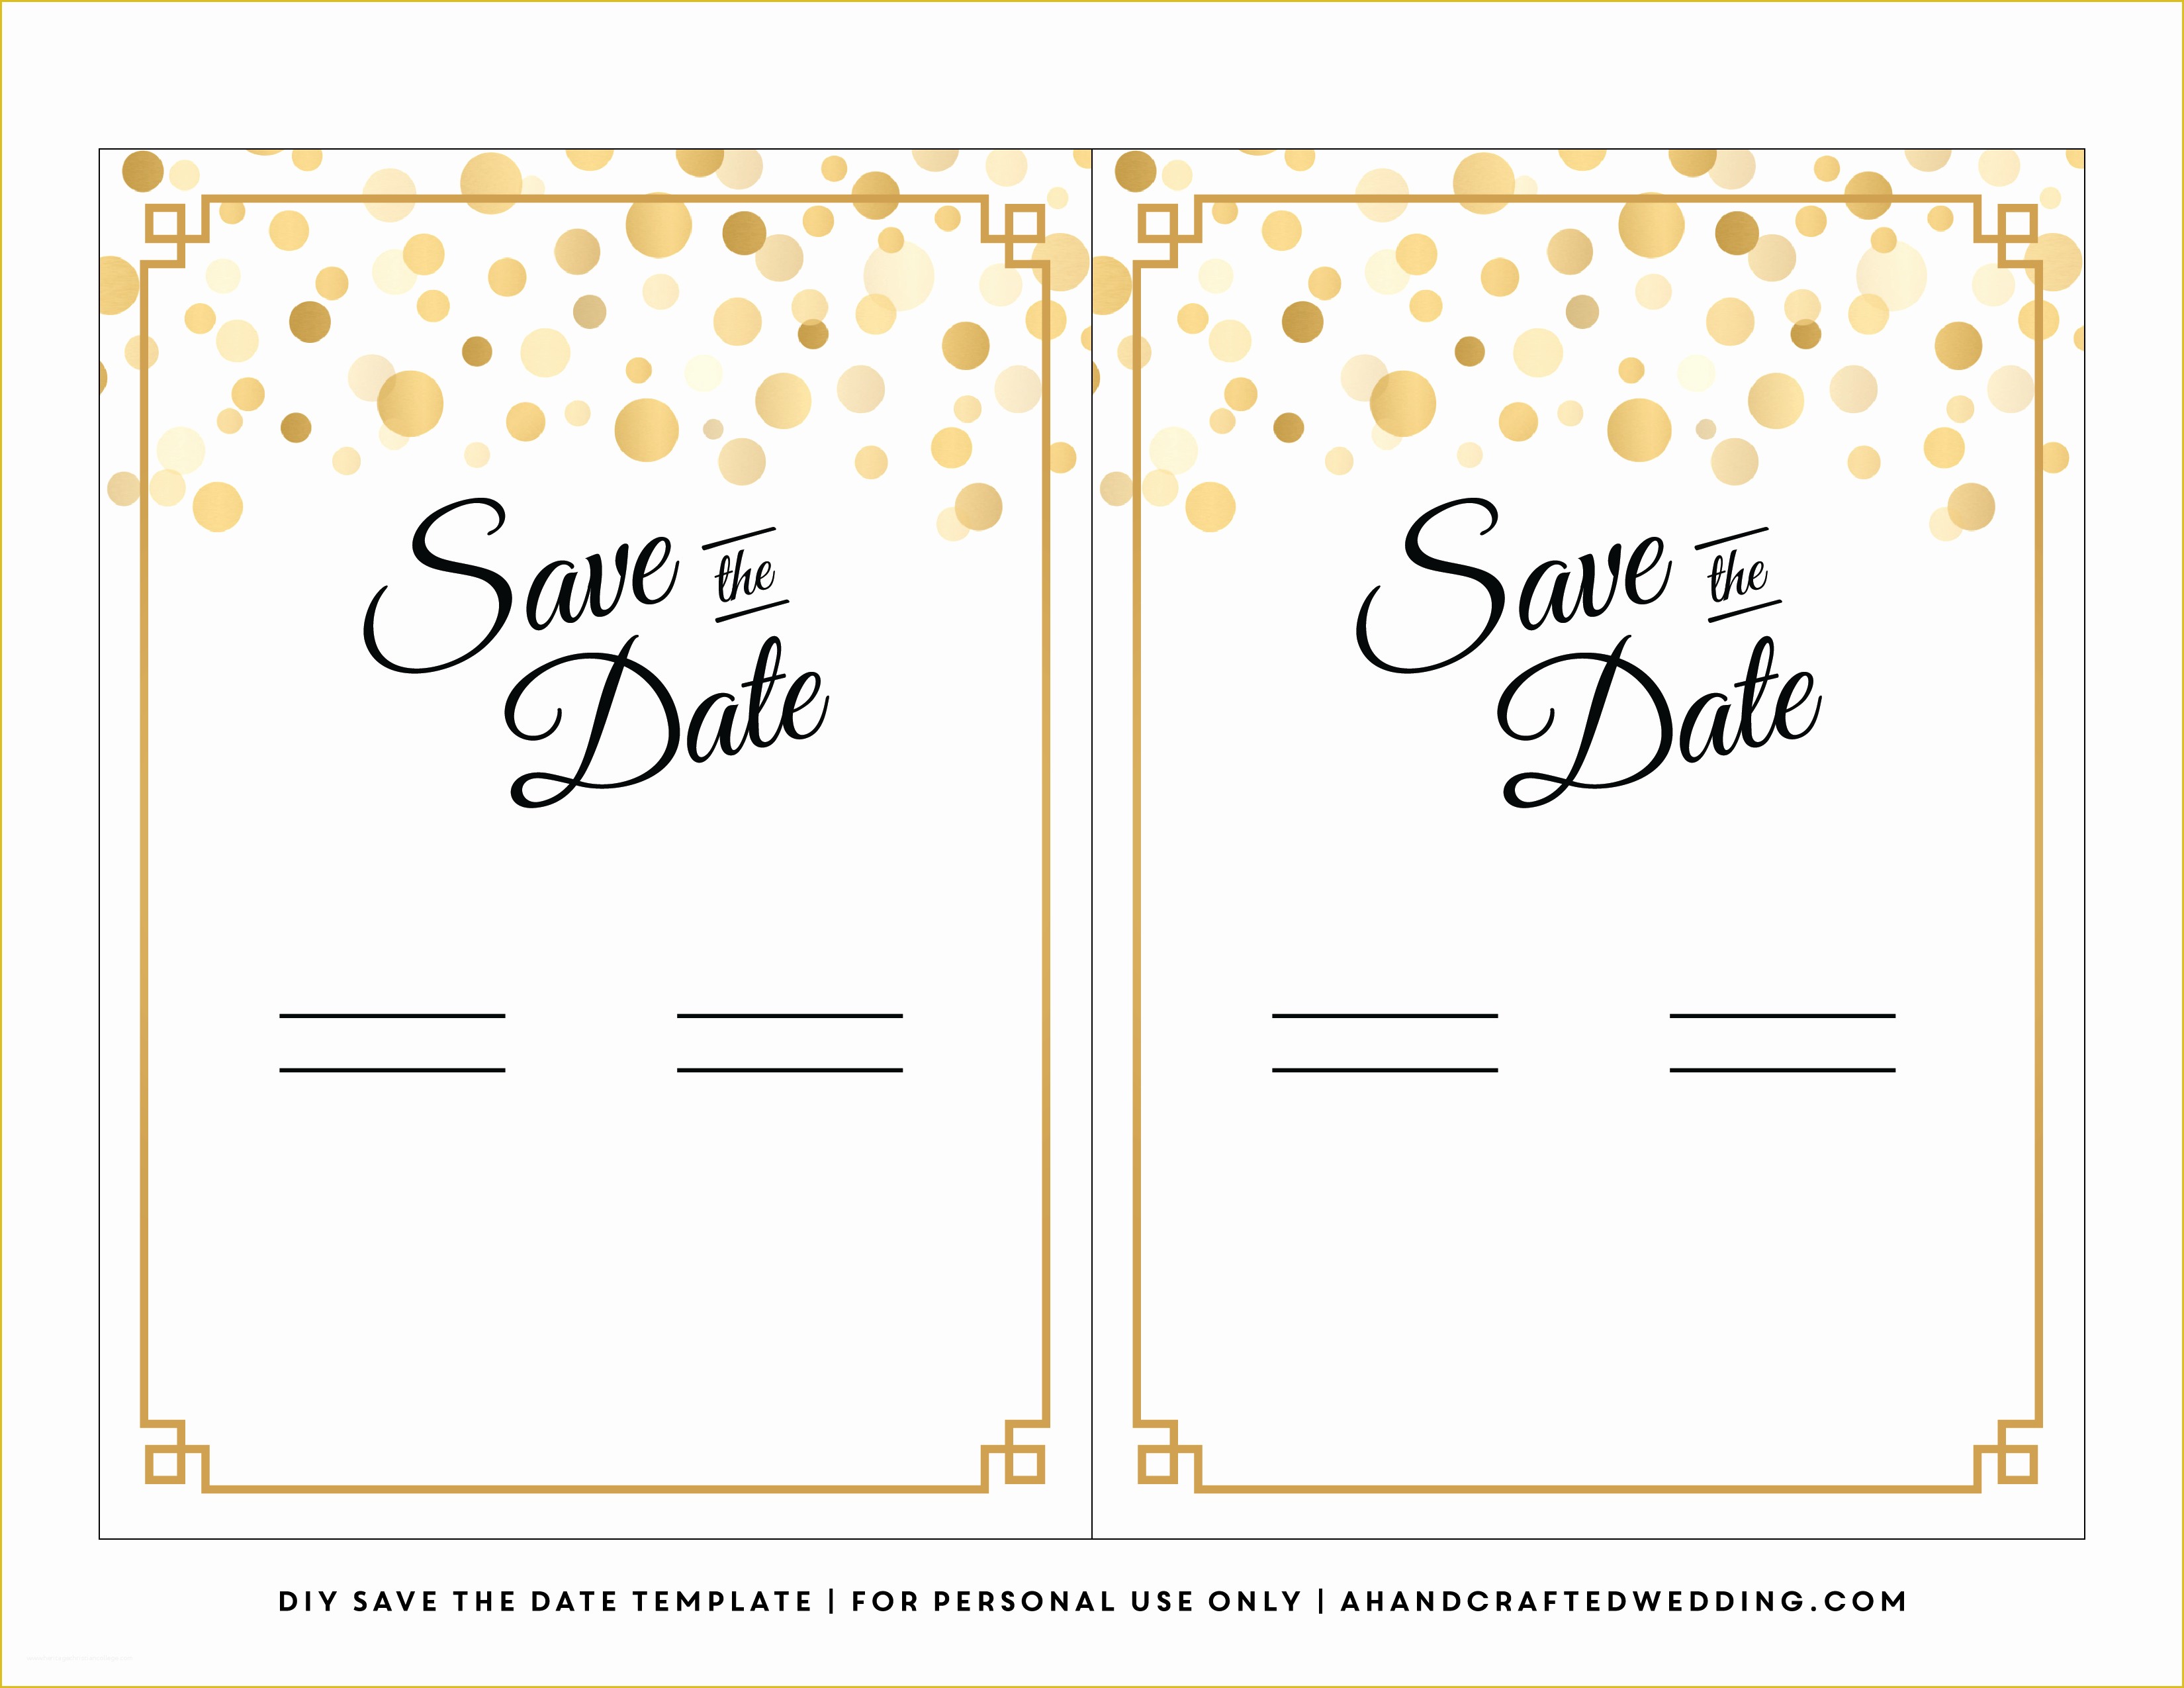 Free Save the Date Templates Of 7 Best Of Diy Save the Date Template